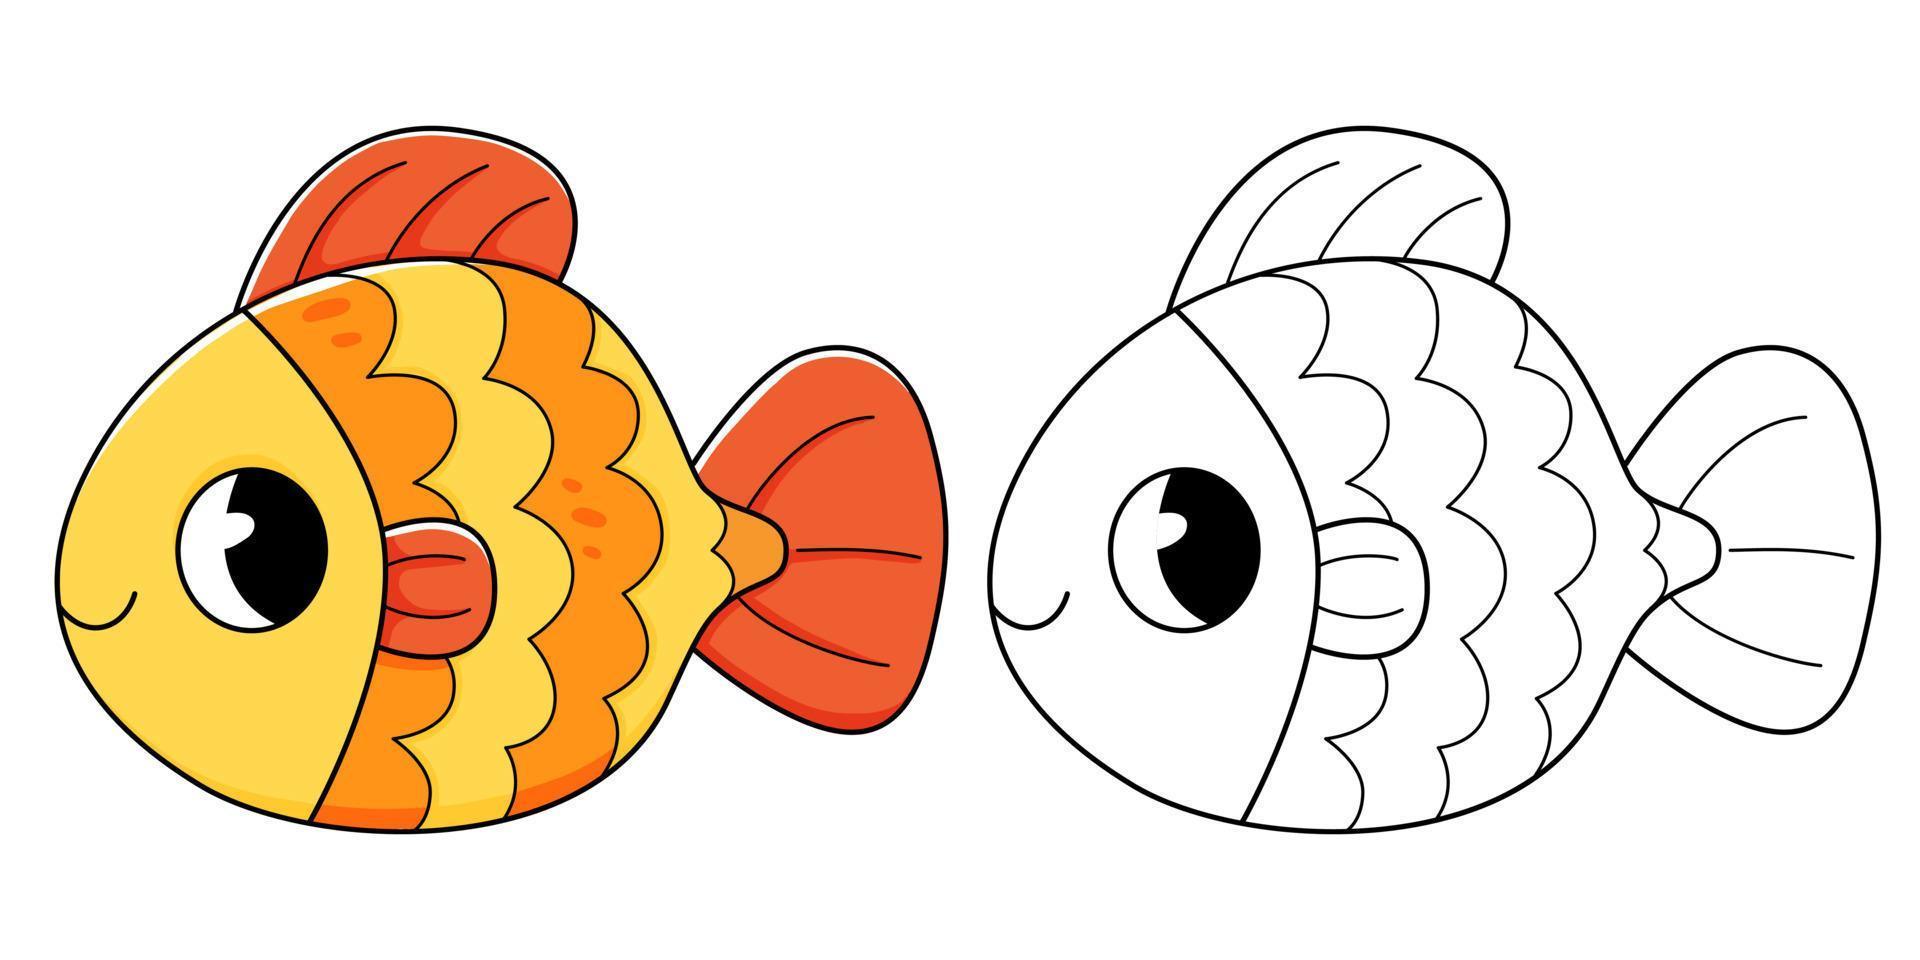 Goldfish coloring book with coloring example for kids. Coloring page with fish. Monochrome and color version. children's illustration vector